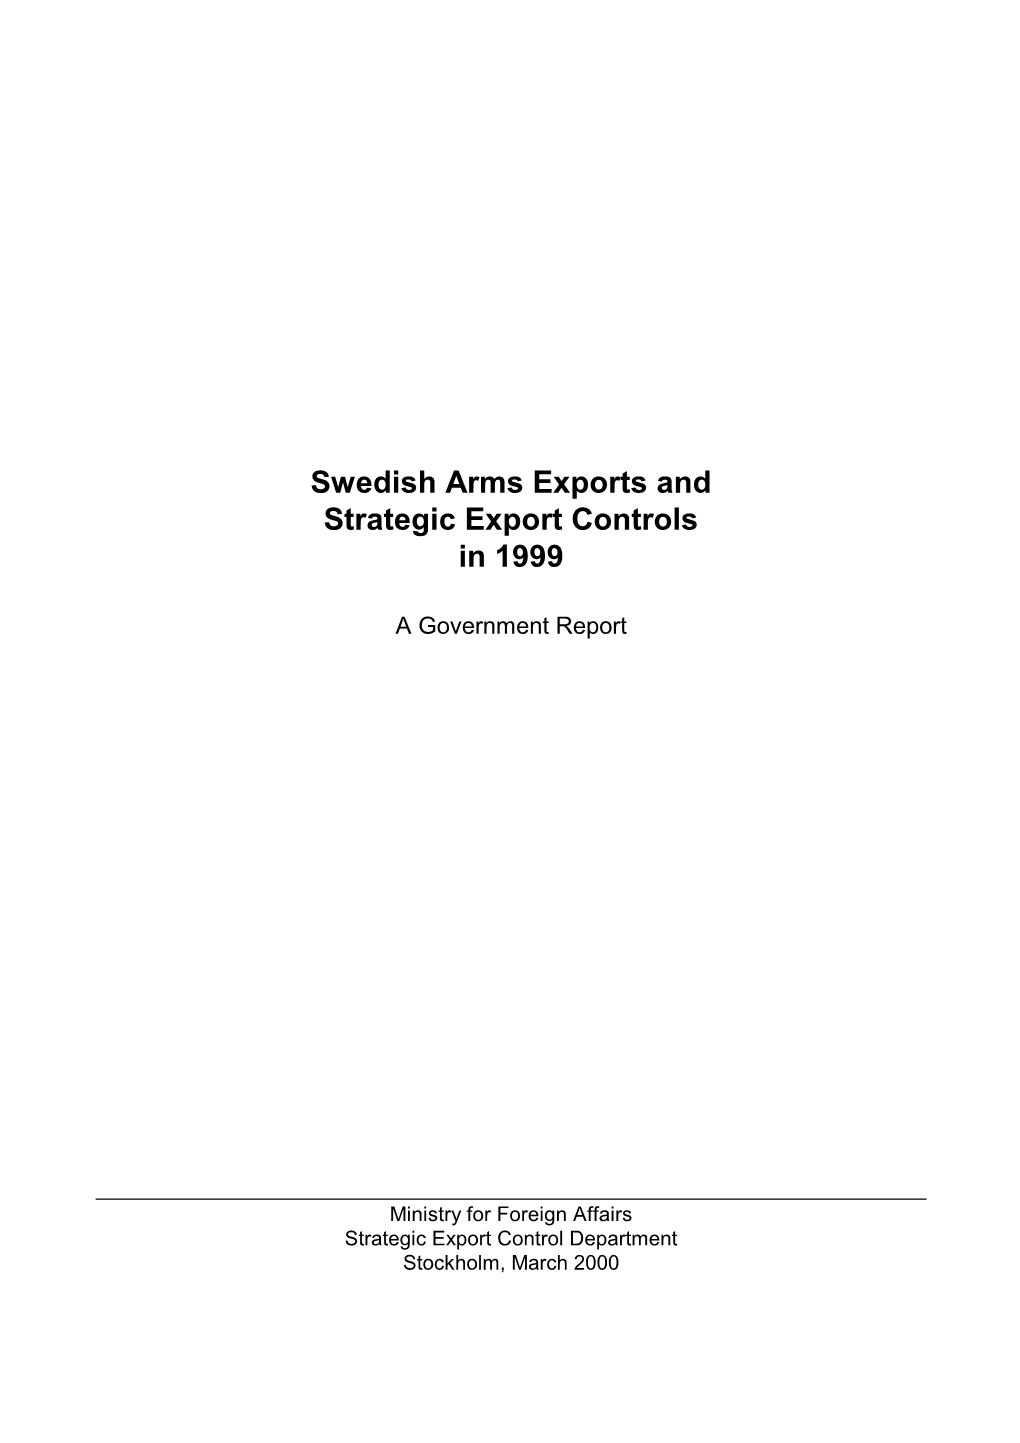 Swedish Arms Exports and Strategic Export Controls in 1999